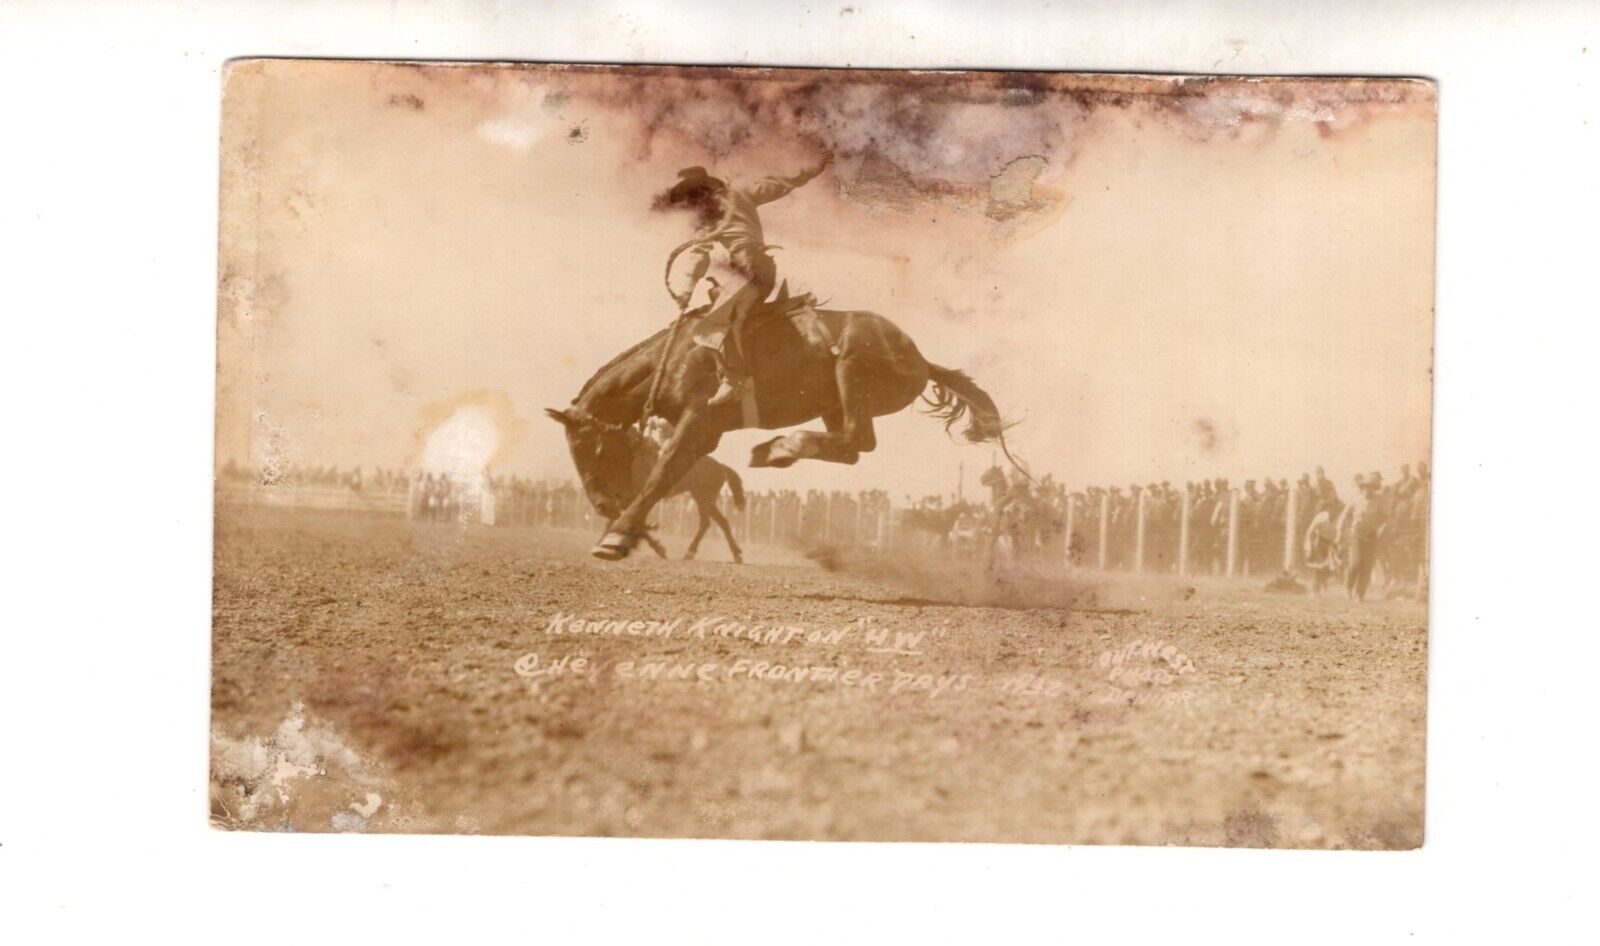 1936 real photo postcard, Kenneth Knight on HW, Cheyenne Frontier Days, Wyoming